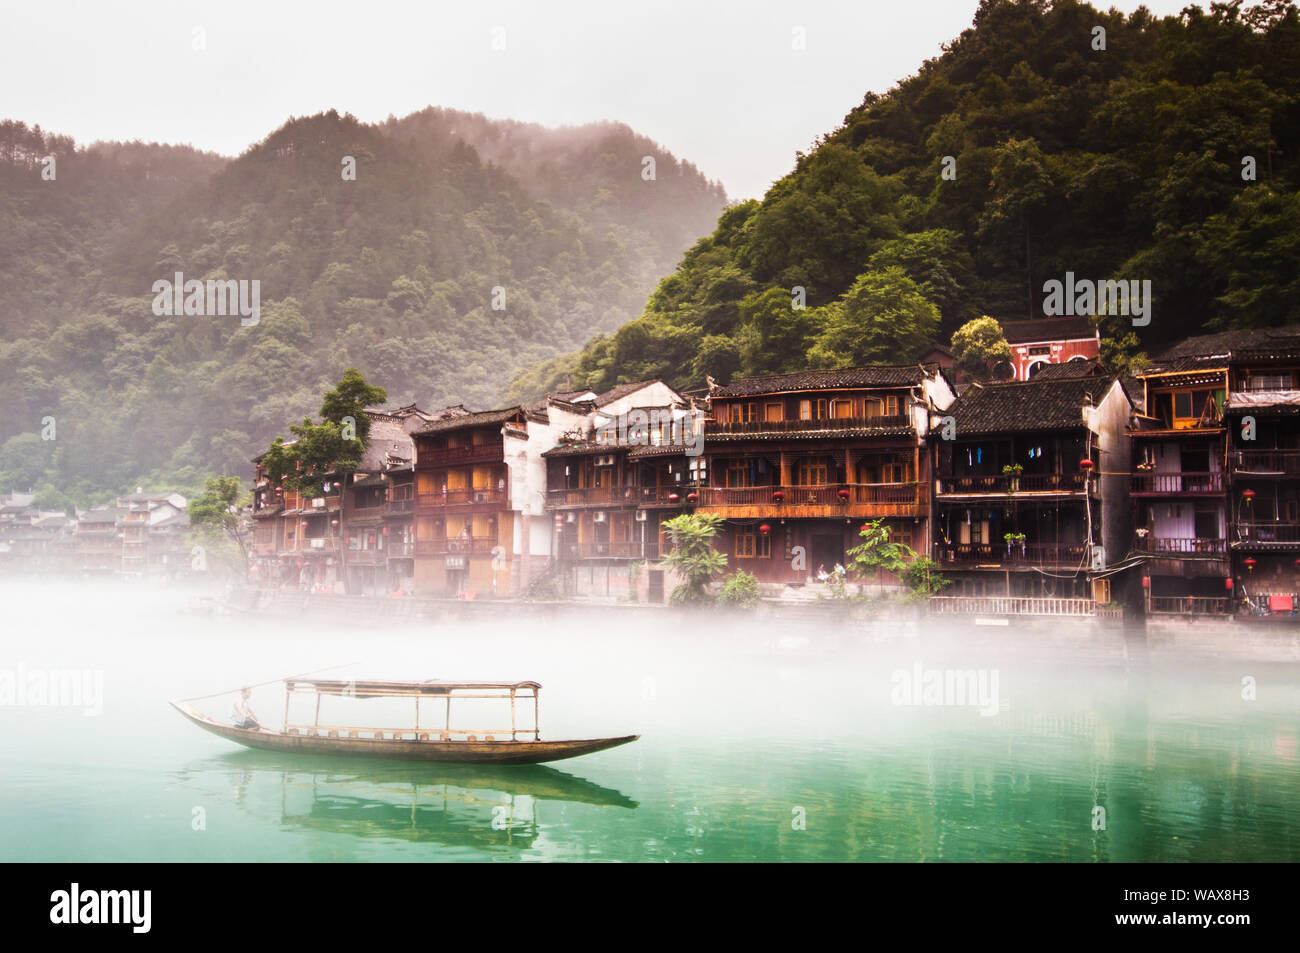 Fenghuang, Hunan, China ancient town. It was built in 1704, and was added to the UNESCO World Heritage Tentative List on March 28, 2008. Photo shot on Stock Photo